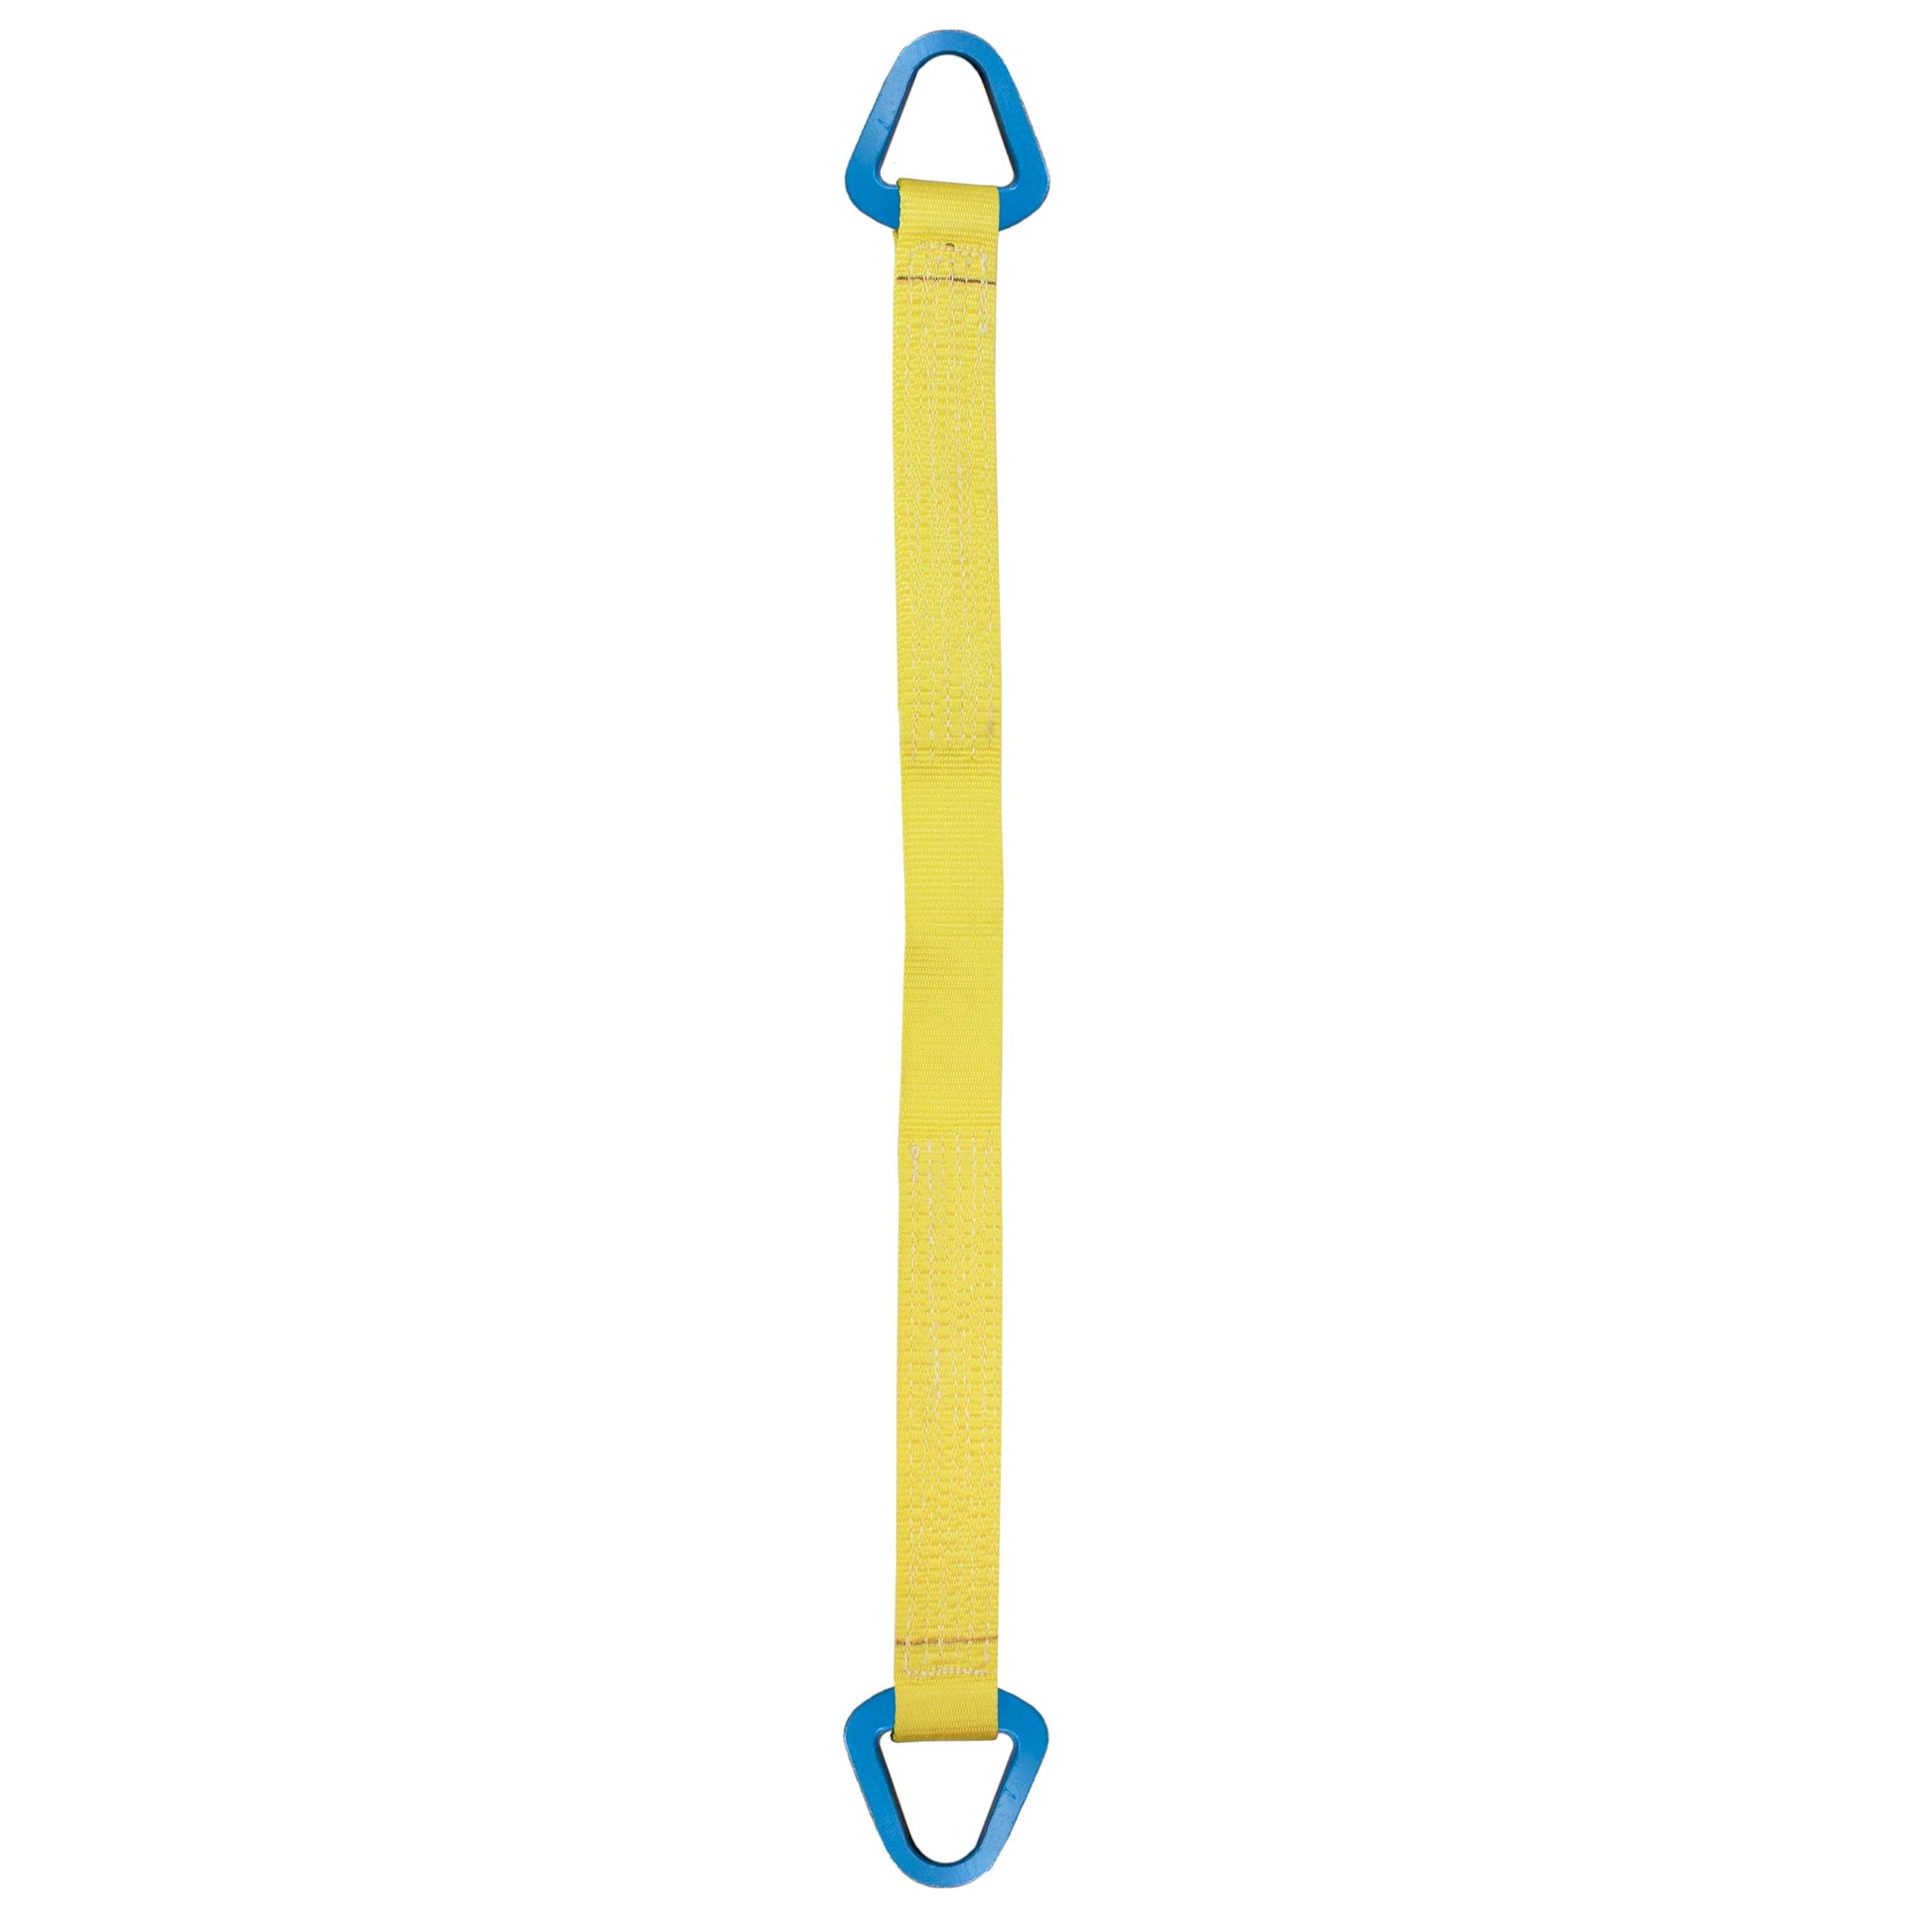 Nylon Lifting Sling Triangle 3 inch x 3 foot 2ply image 1 of 2